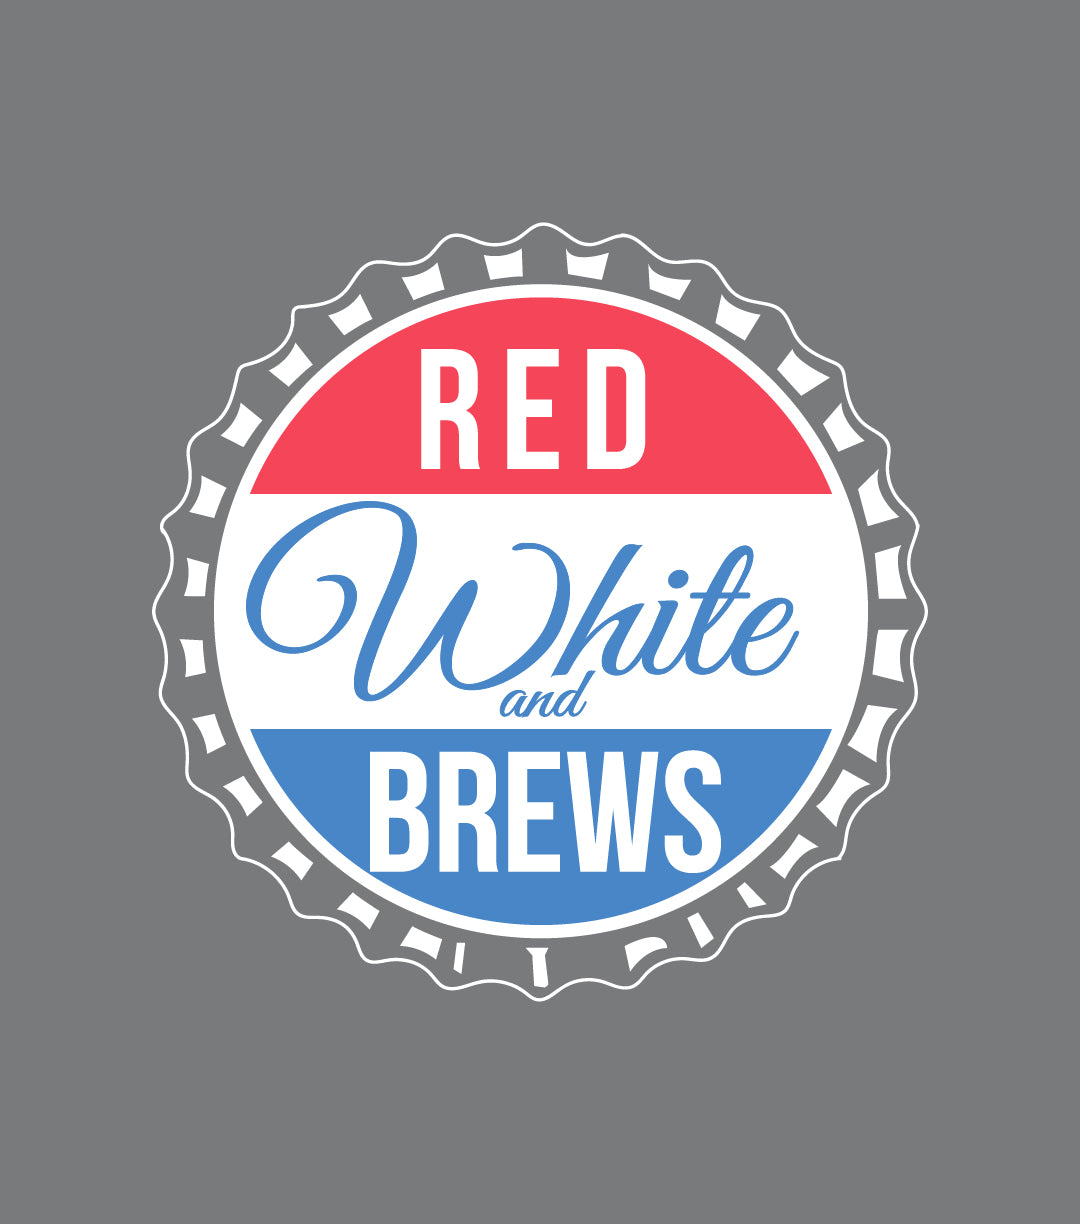 RED WHITE AND BREWS MEN'S TSHIRT